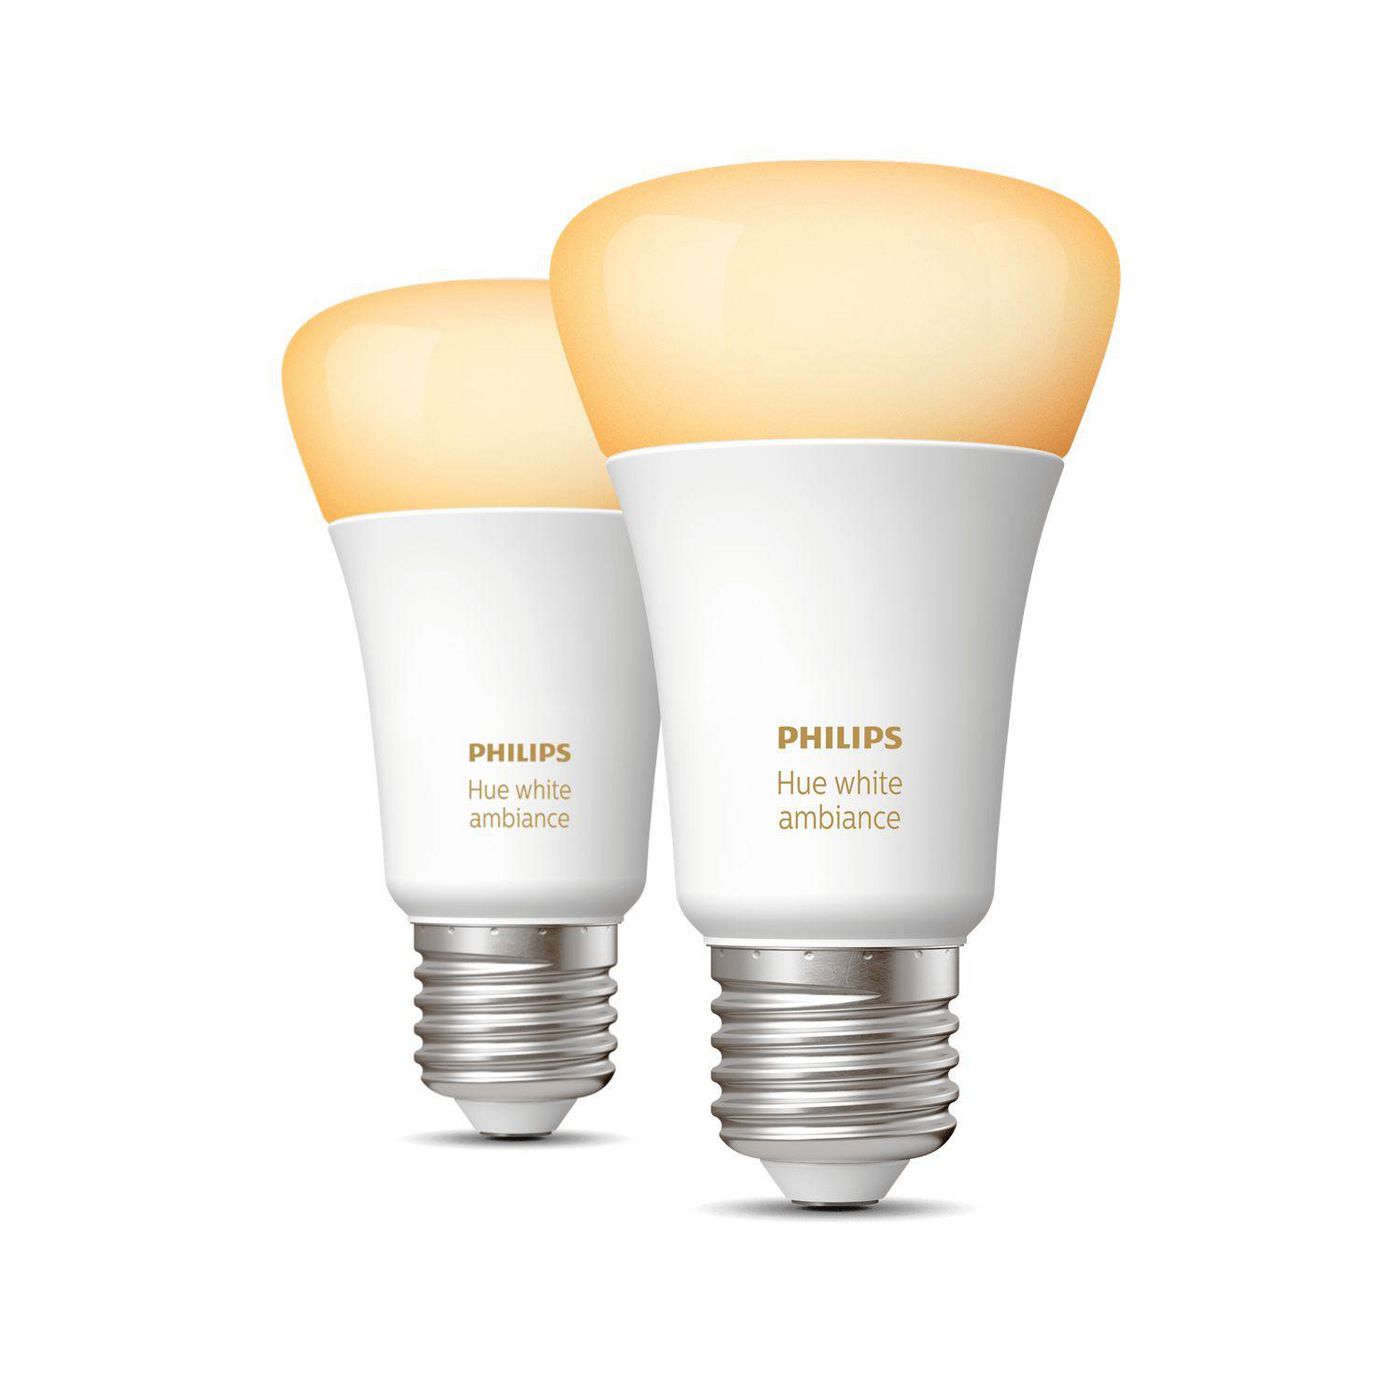 Philips-by-Signify 929002216904 Hue White Ambiance E27 Bulb 